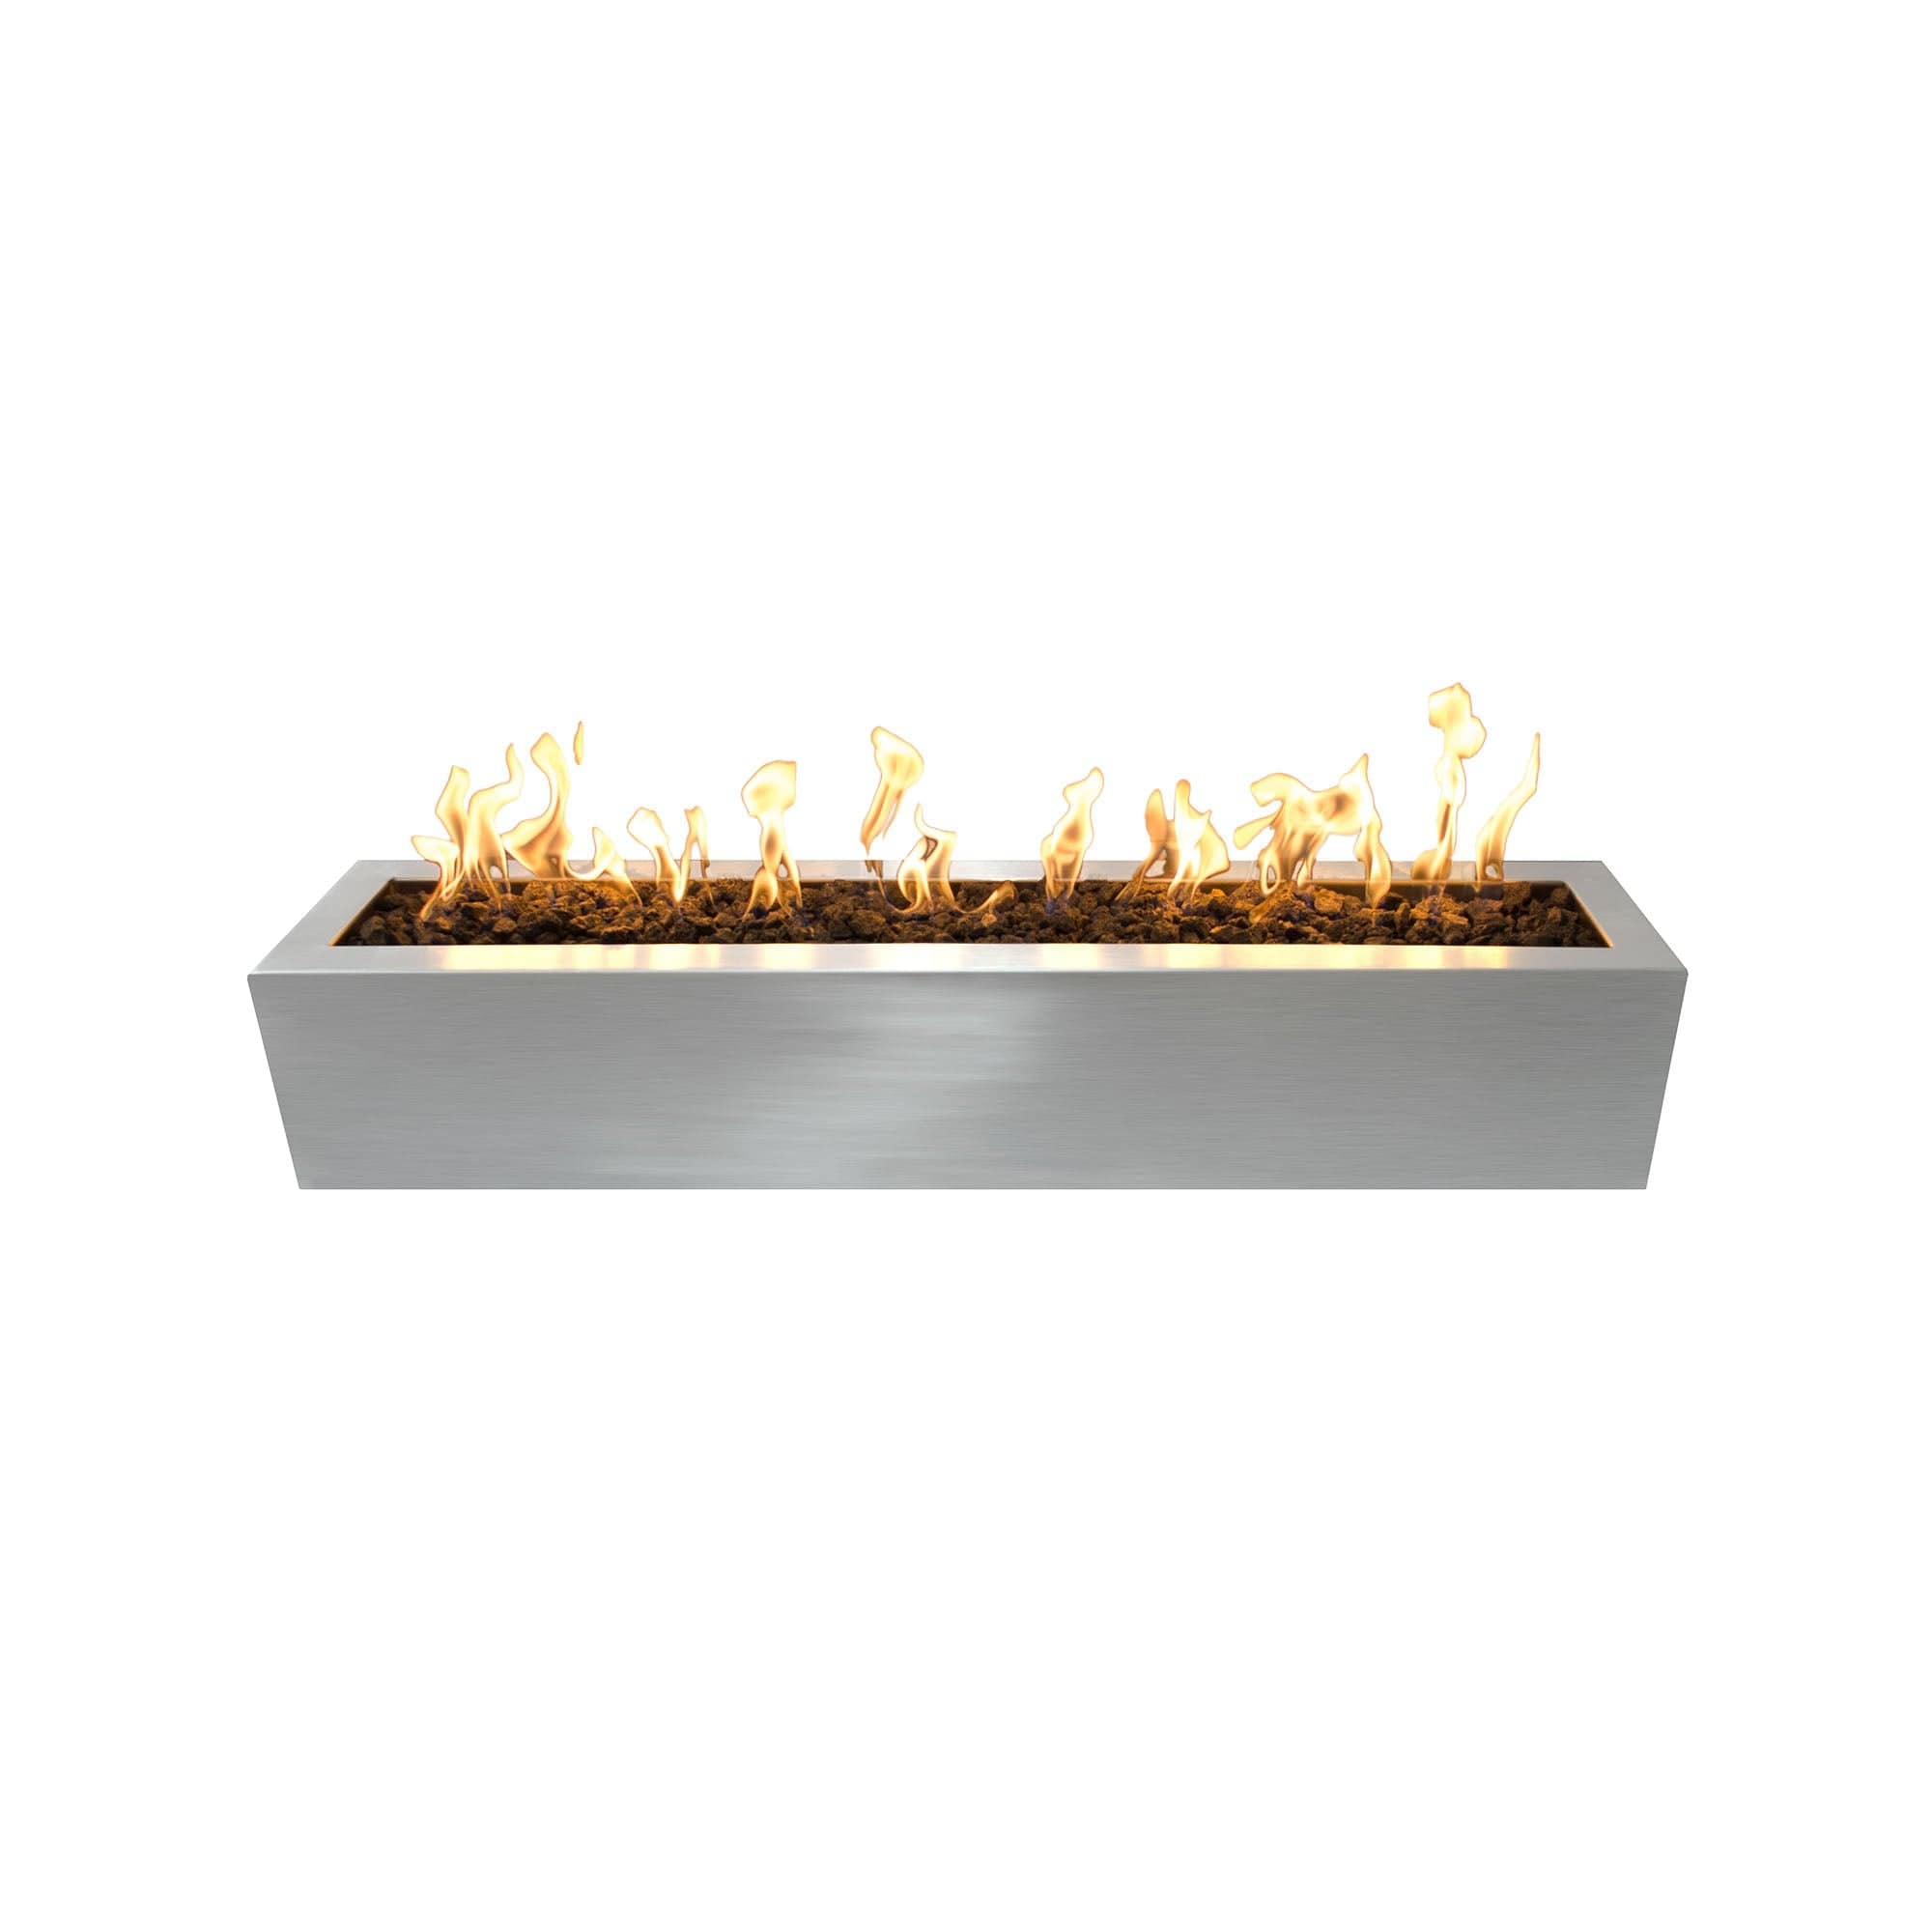 The Outdoor Plus Fire Pit 48" / Match Lit / Natural Gas The Outdoor Plus Eaves Fire Pit | Stainless Steel OPT-LBTSS48